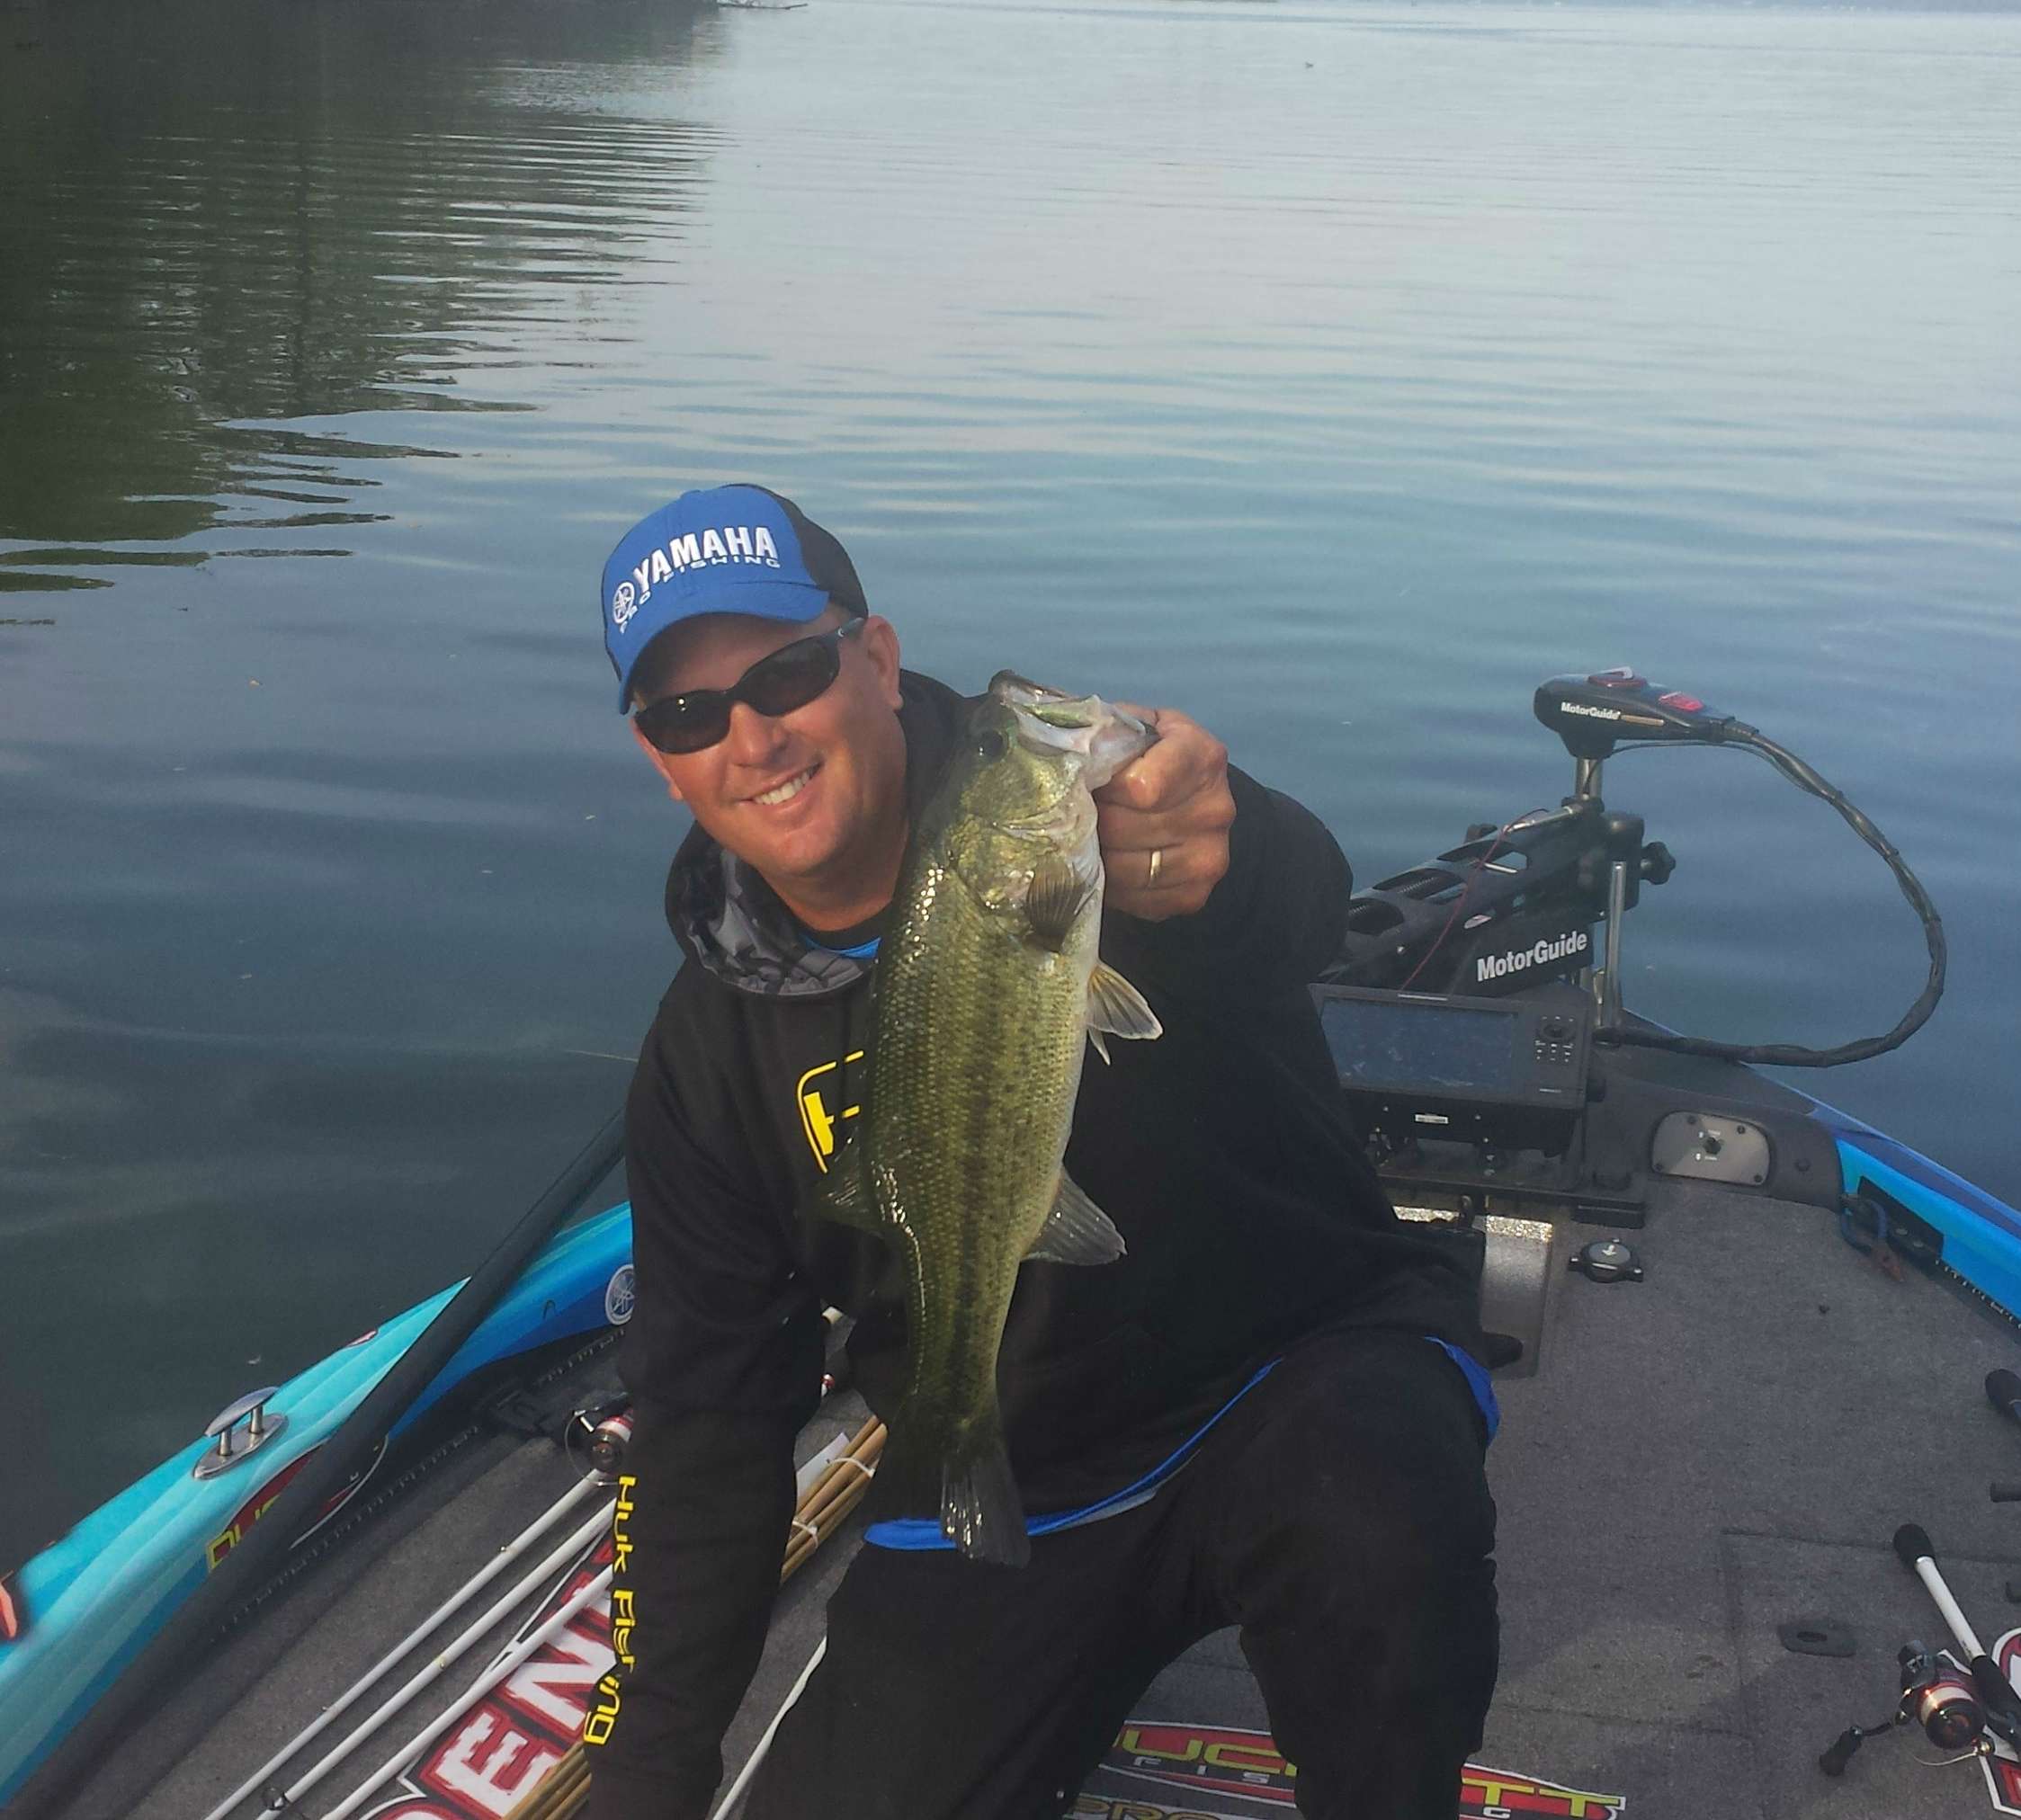 Cliff Prince with No. 3
<br>Photo by Bassmaster Marshal Jesse New